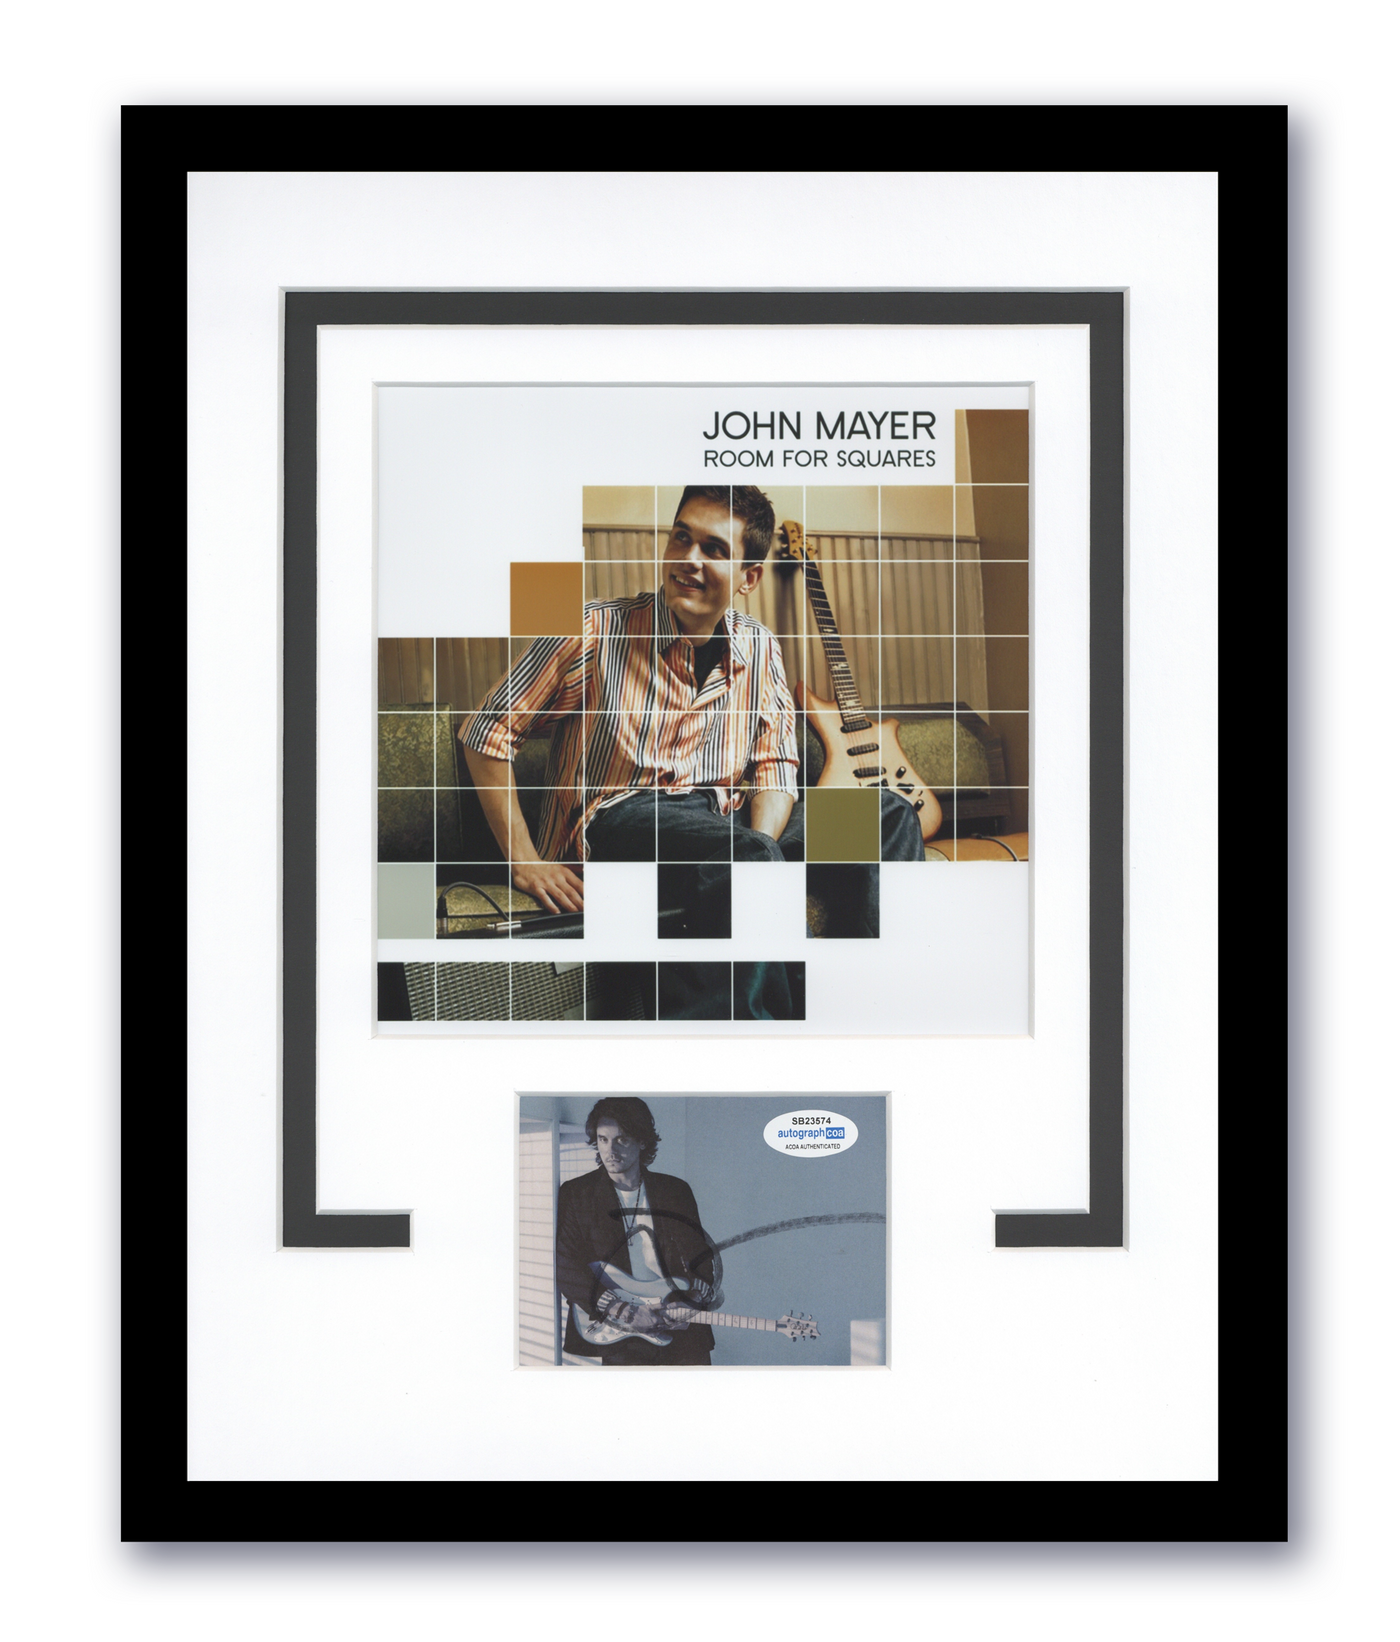 John Mayer Autographed Signed 11x14 Framed CD Photo Room For Squares ACOA